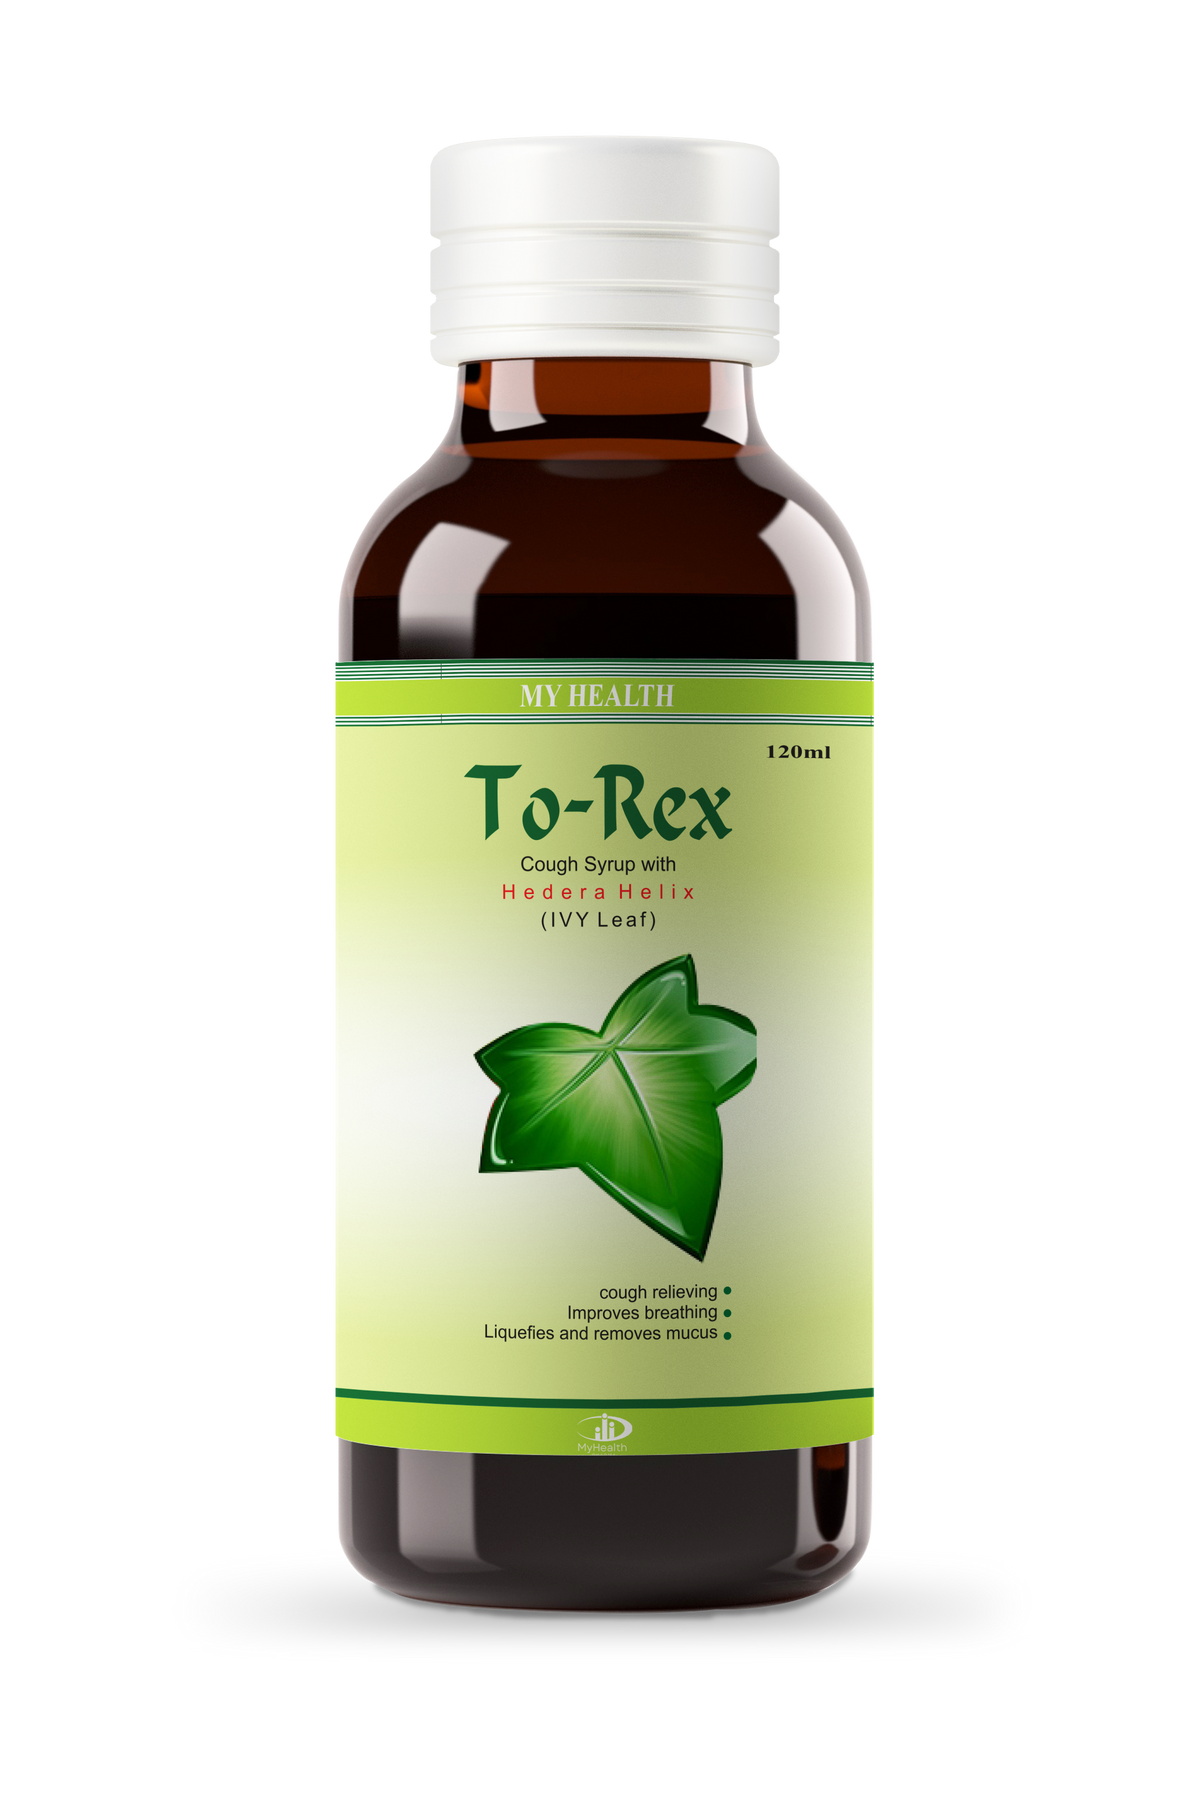 To-Rex Cough Syrup with Hedera Helix